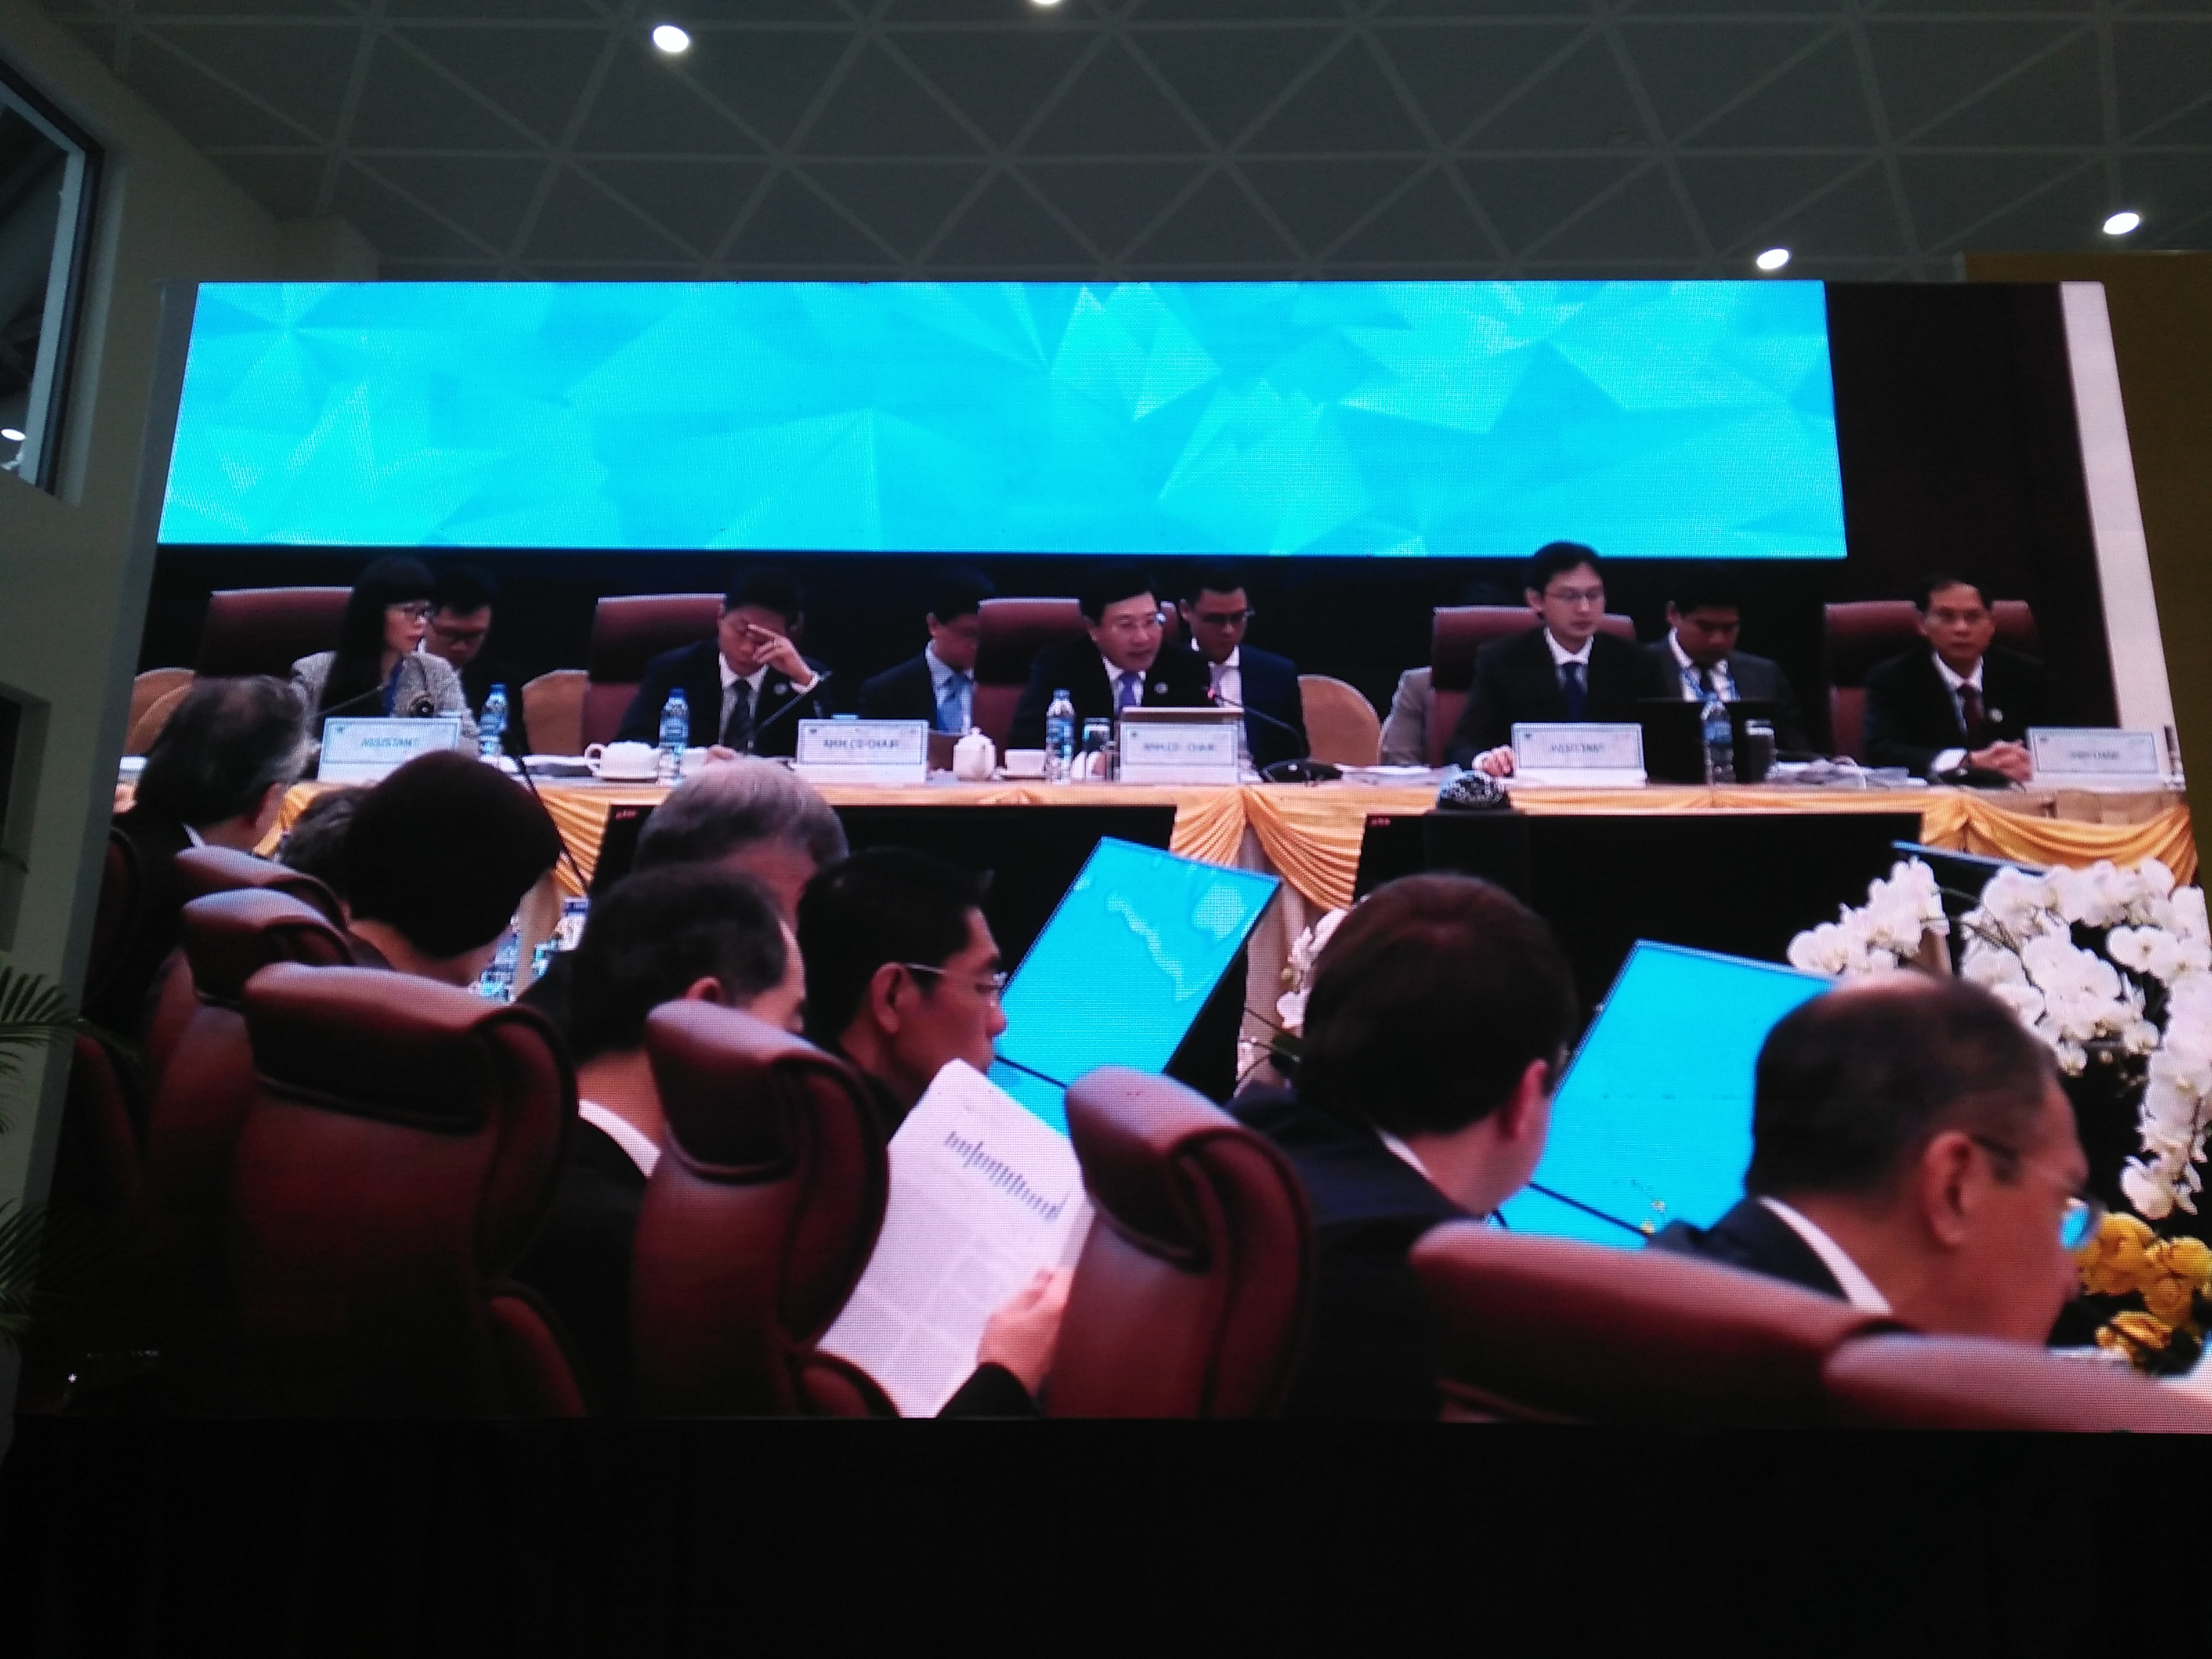 29th APEC Ministerial Meeting launched